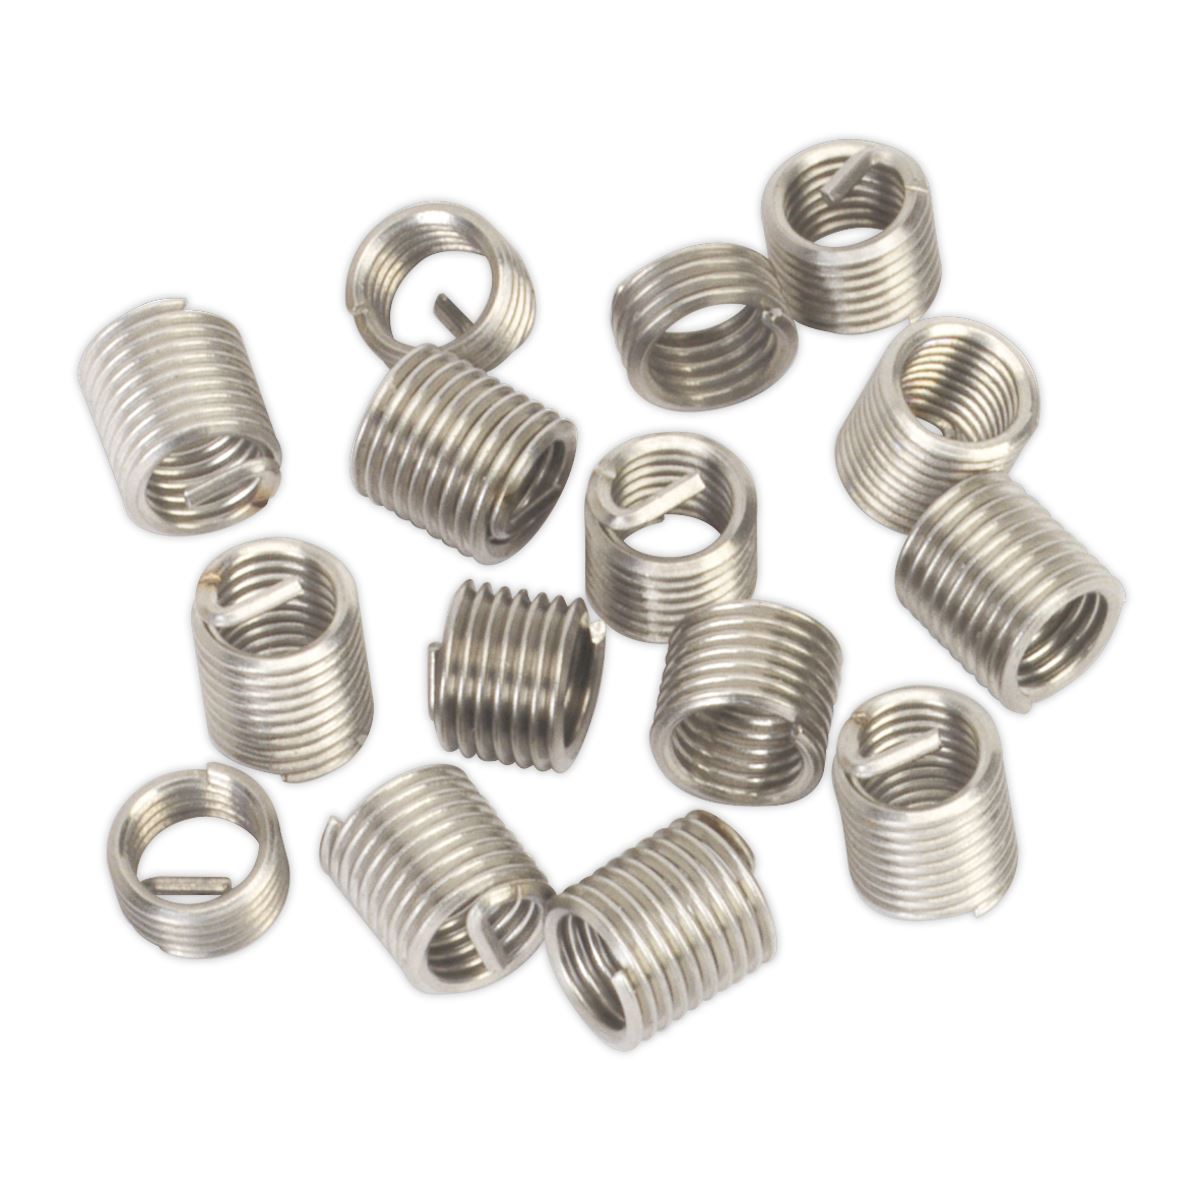 Sealey Thread Insert M6 x 1mm for TRM6 Threaded Inserts Helicoil 15 Pack